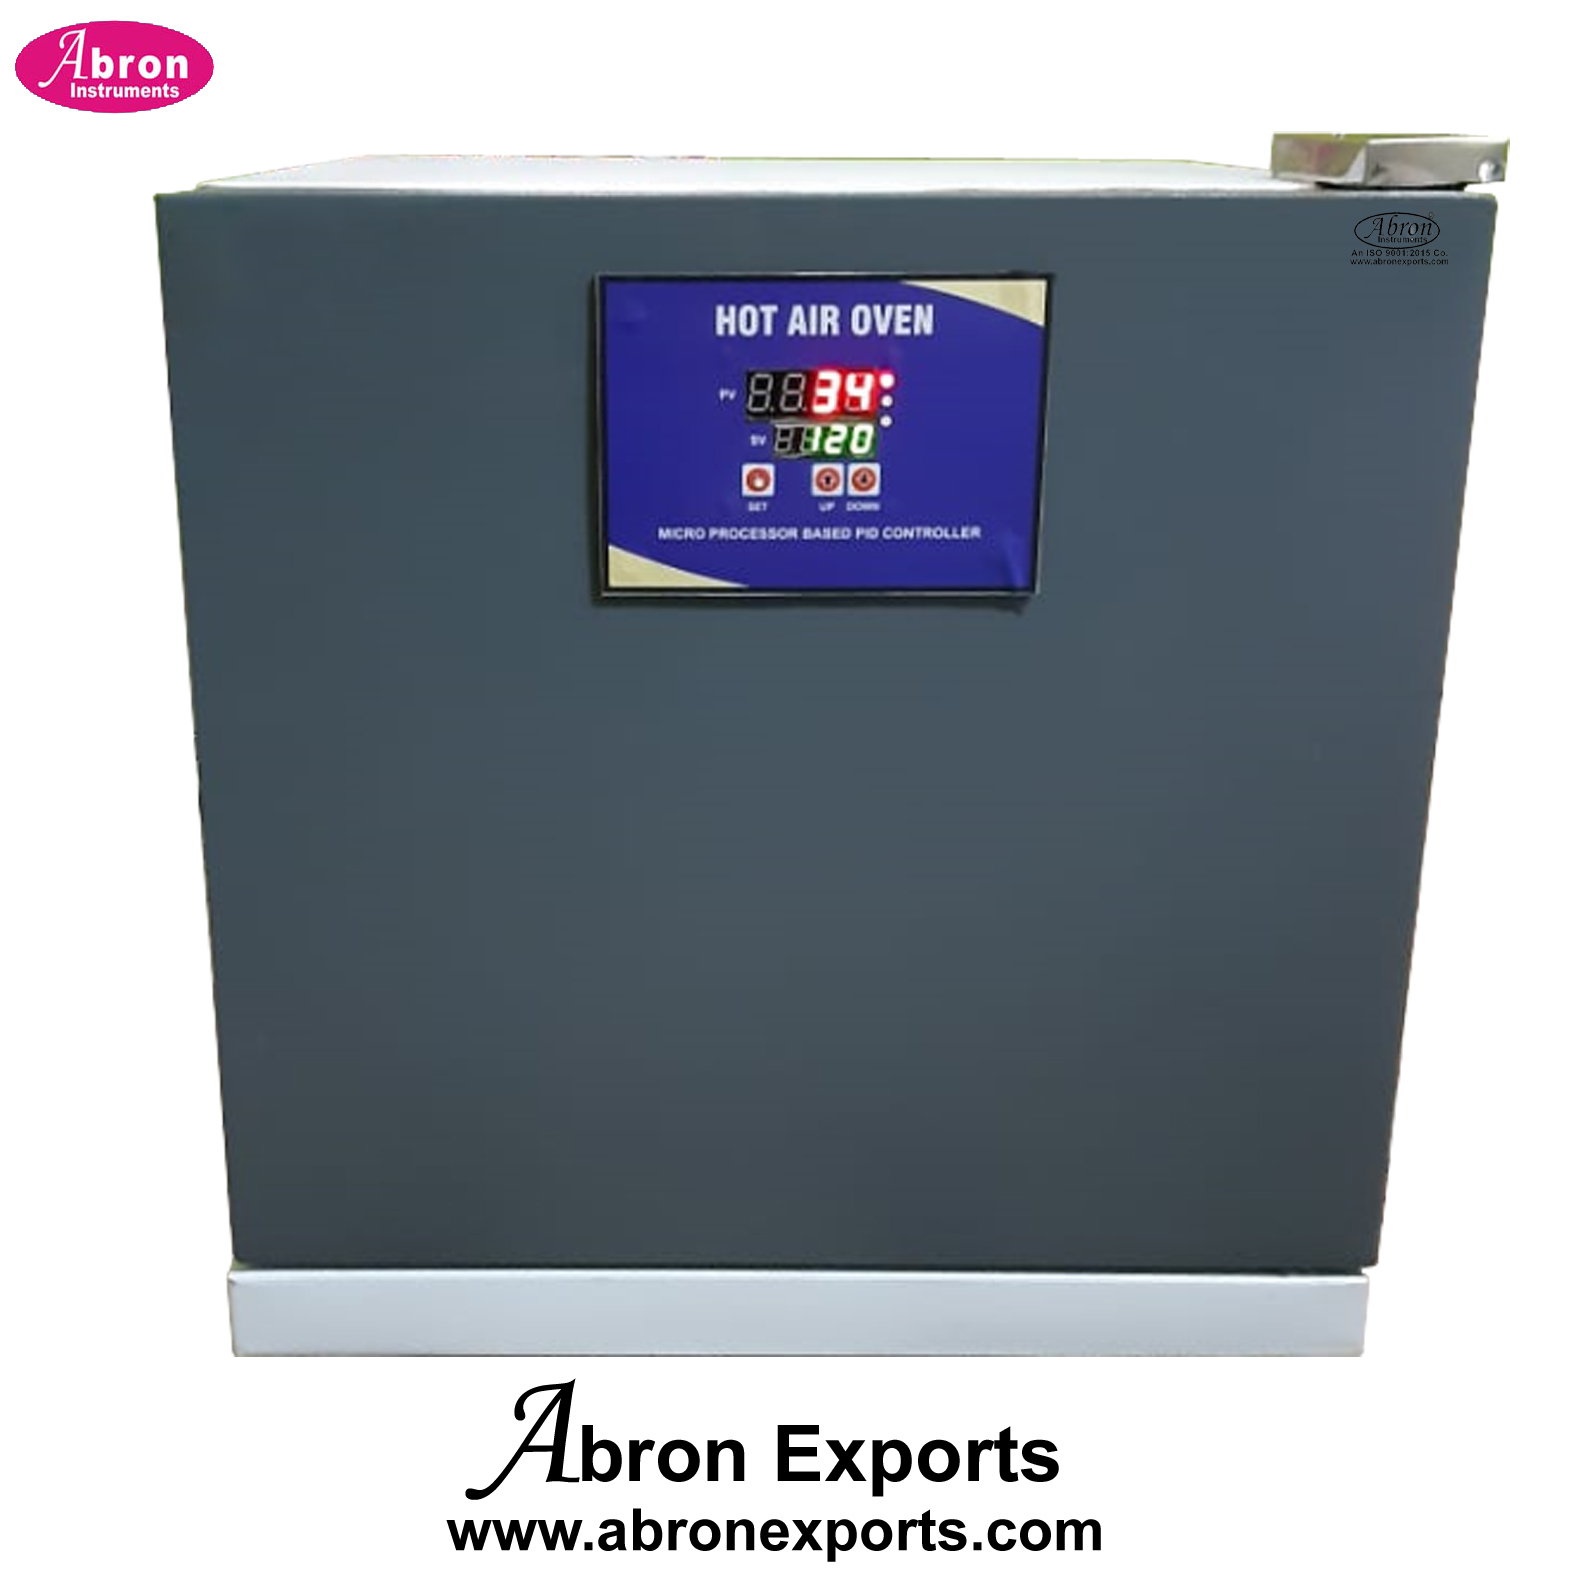 Oven SS Chamber digital pid controller stainless steel chamber outer steel powder coated body Abron ABM-2691D18SS 